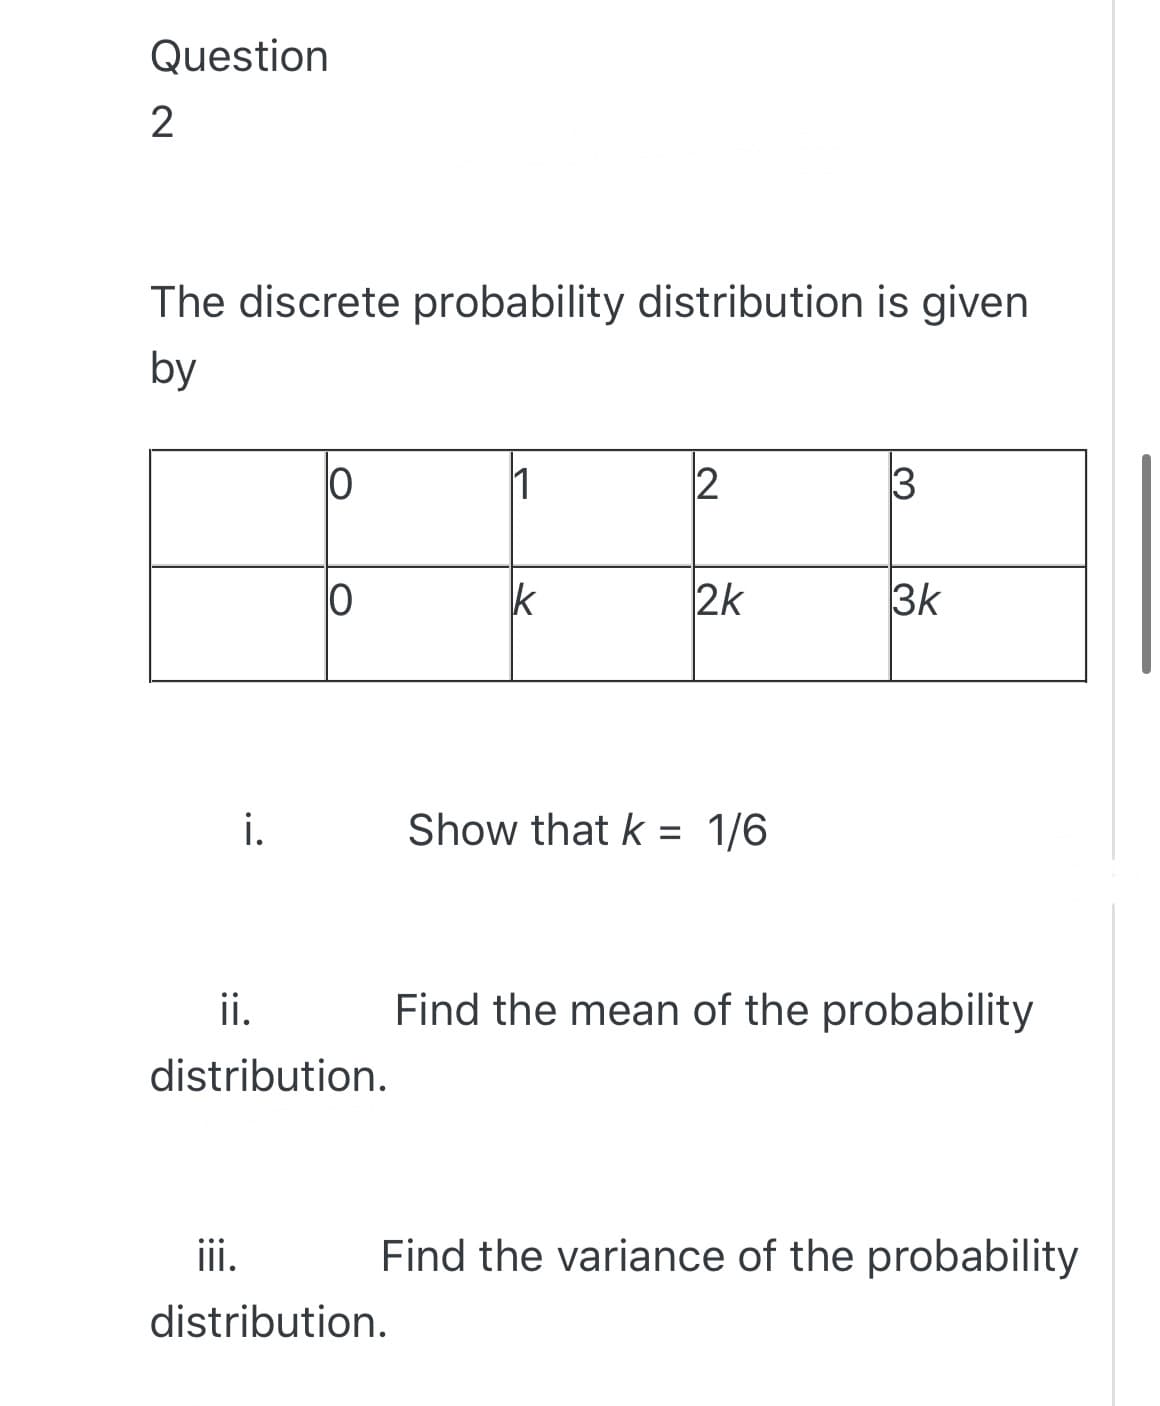 Question
The discrete probability distribution is given
by
1
k
2k
3k
i.
Show that k = 1/6
ii.
Find the mean of the probability
distribution.
iii.
Find the variance of the probability
distribution.
